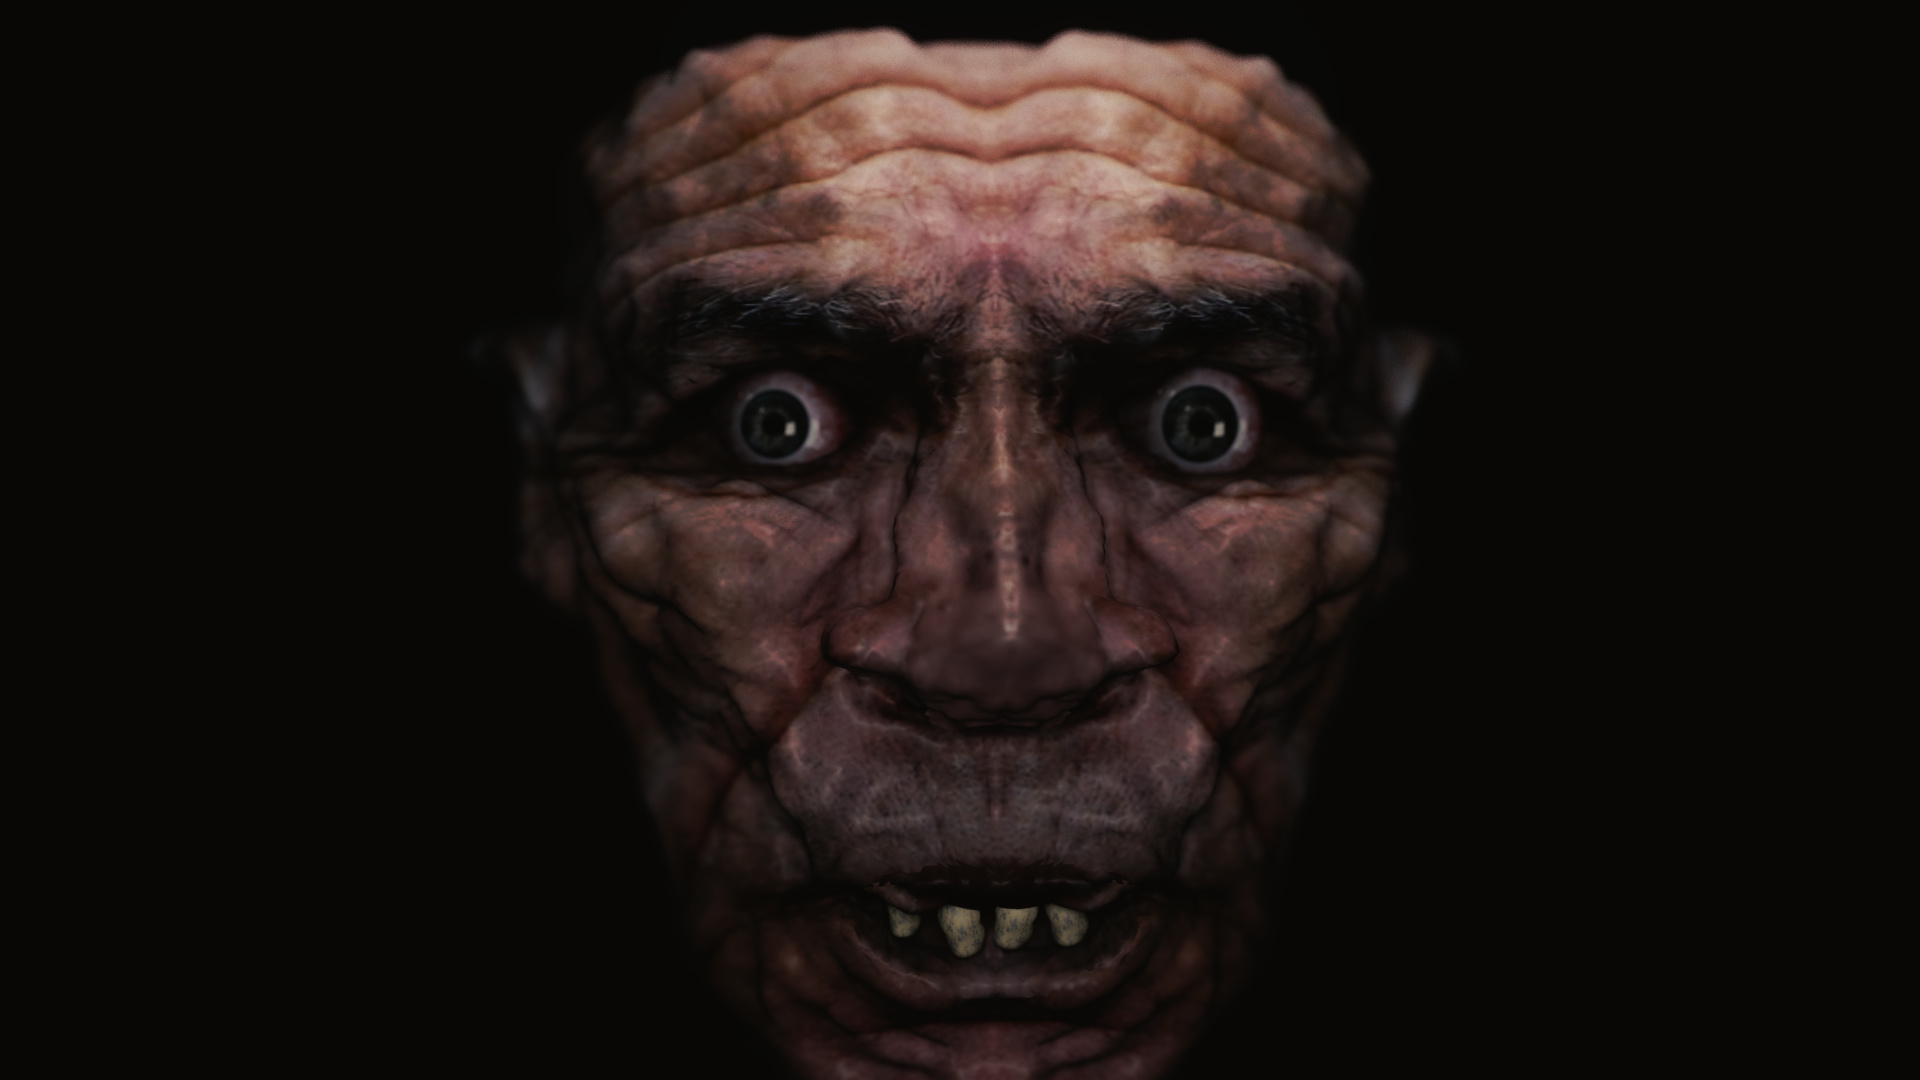 Troll Face - Finished Projects - Blender Artists Community